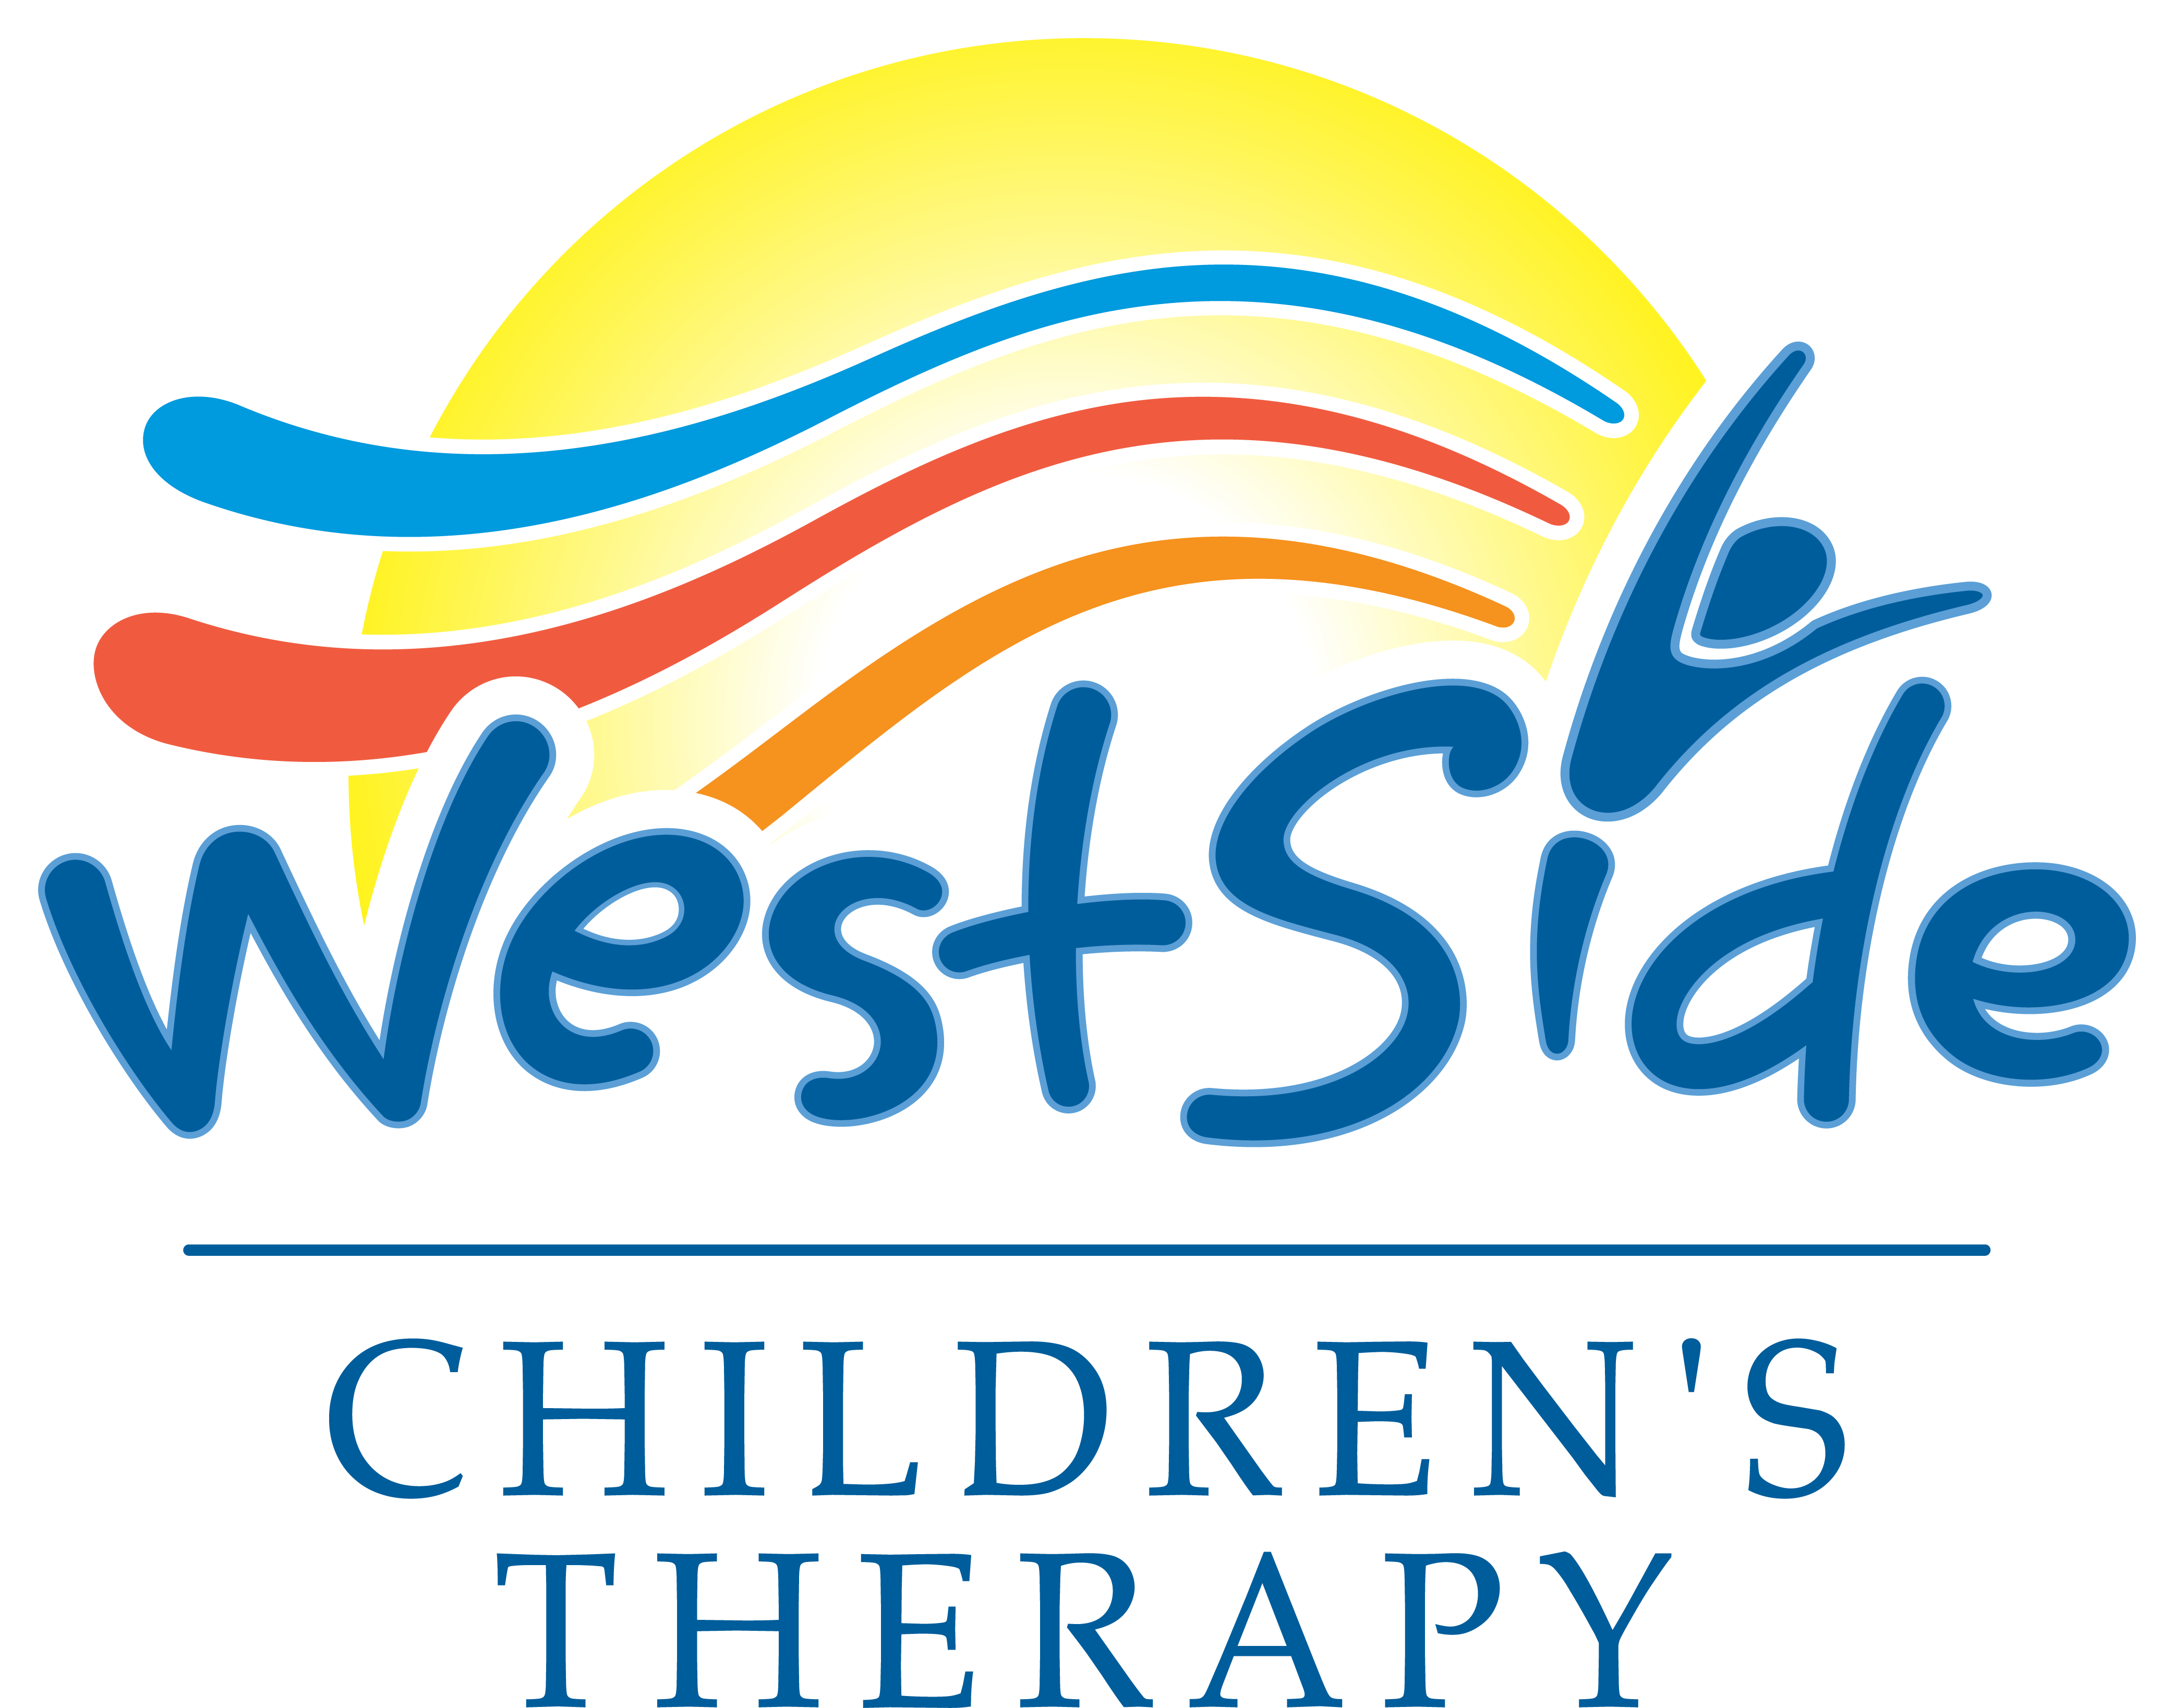 Westside Children's Therapy Company Logo